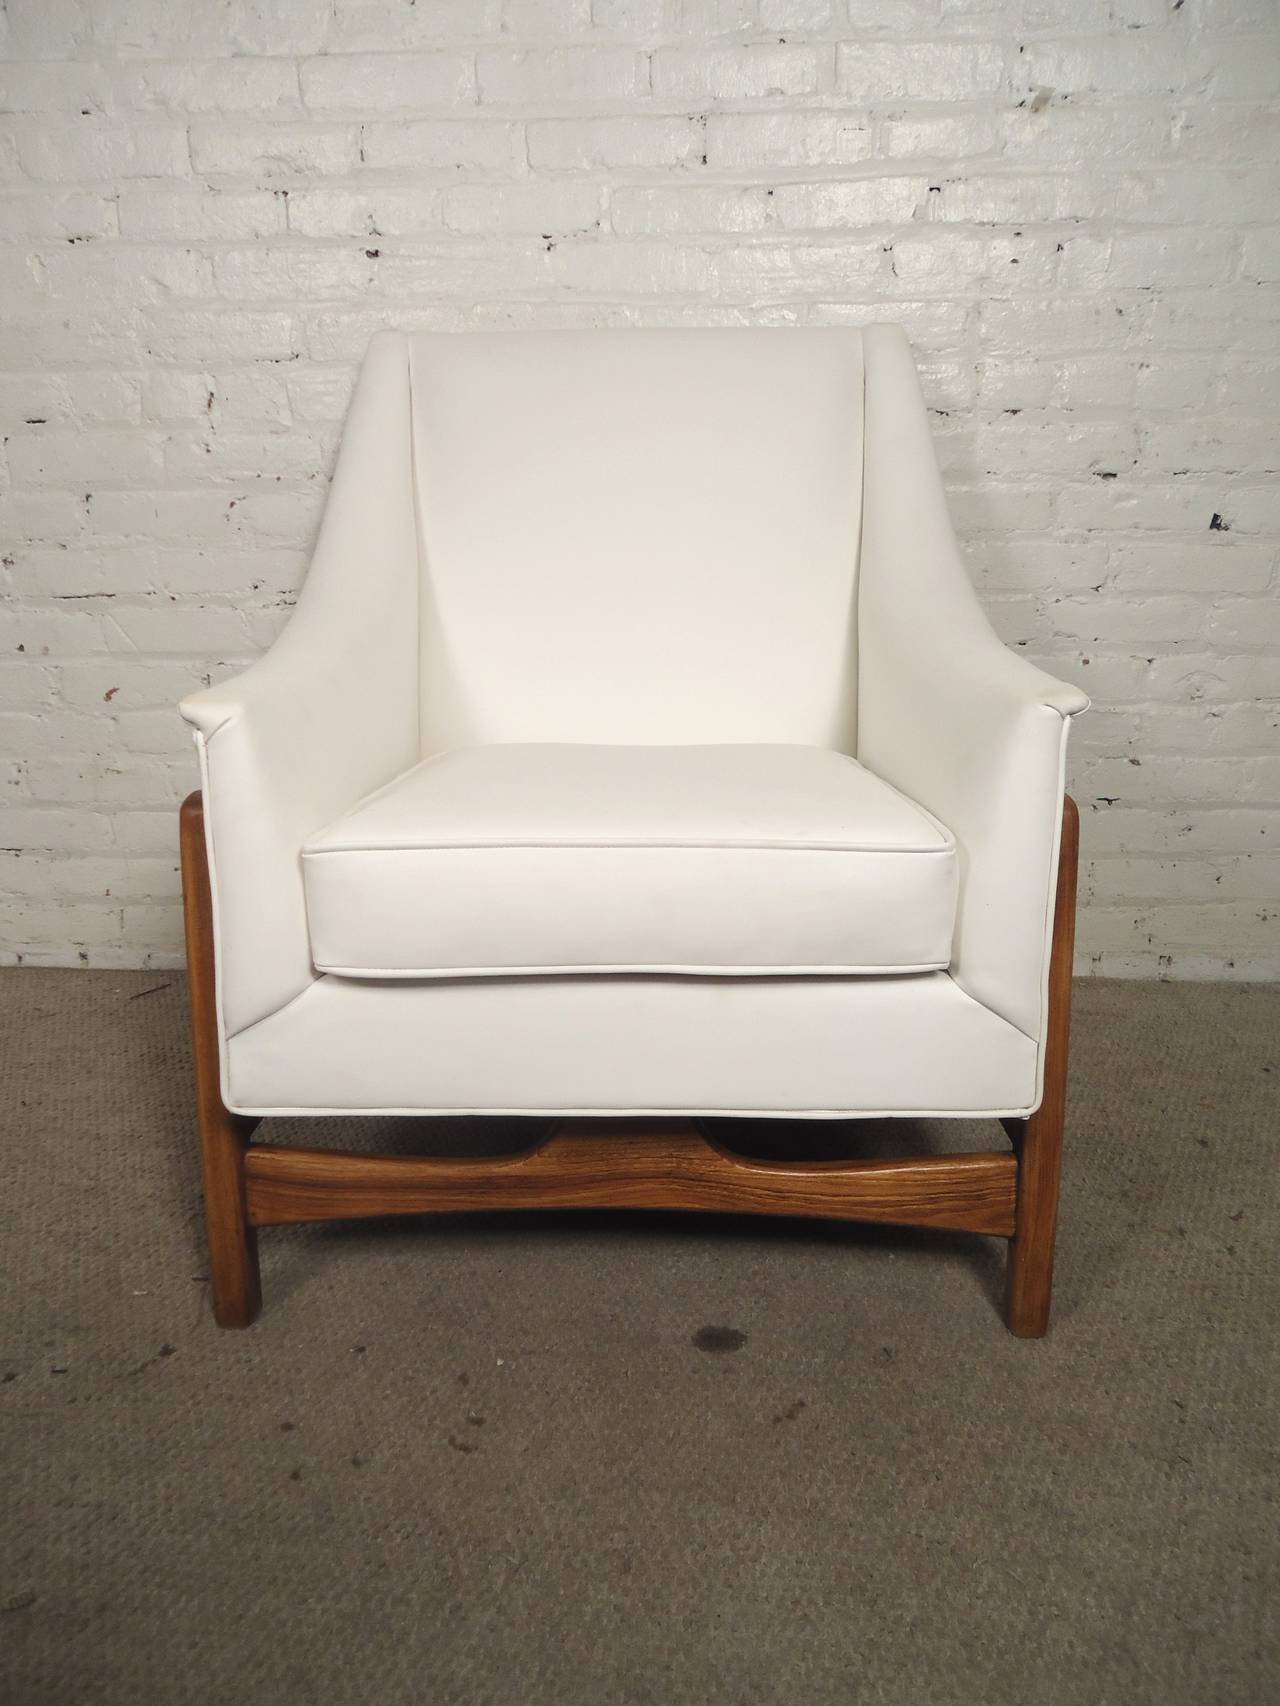 Recovered Mid-Century rocking lounge chair by DUX. Set on a sculpted walnut frame with sweeping lines down the arms. Very comfortable and stylish.

(Please confirm item location - NY or NJ - with dealer).